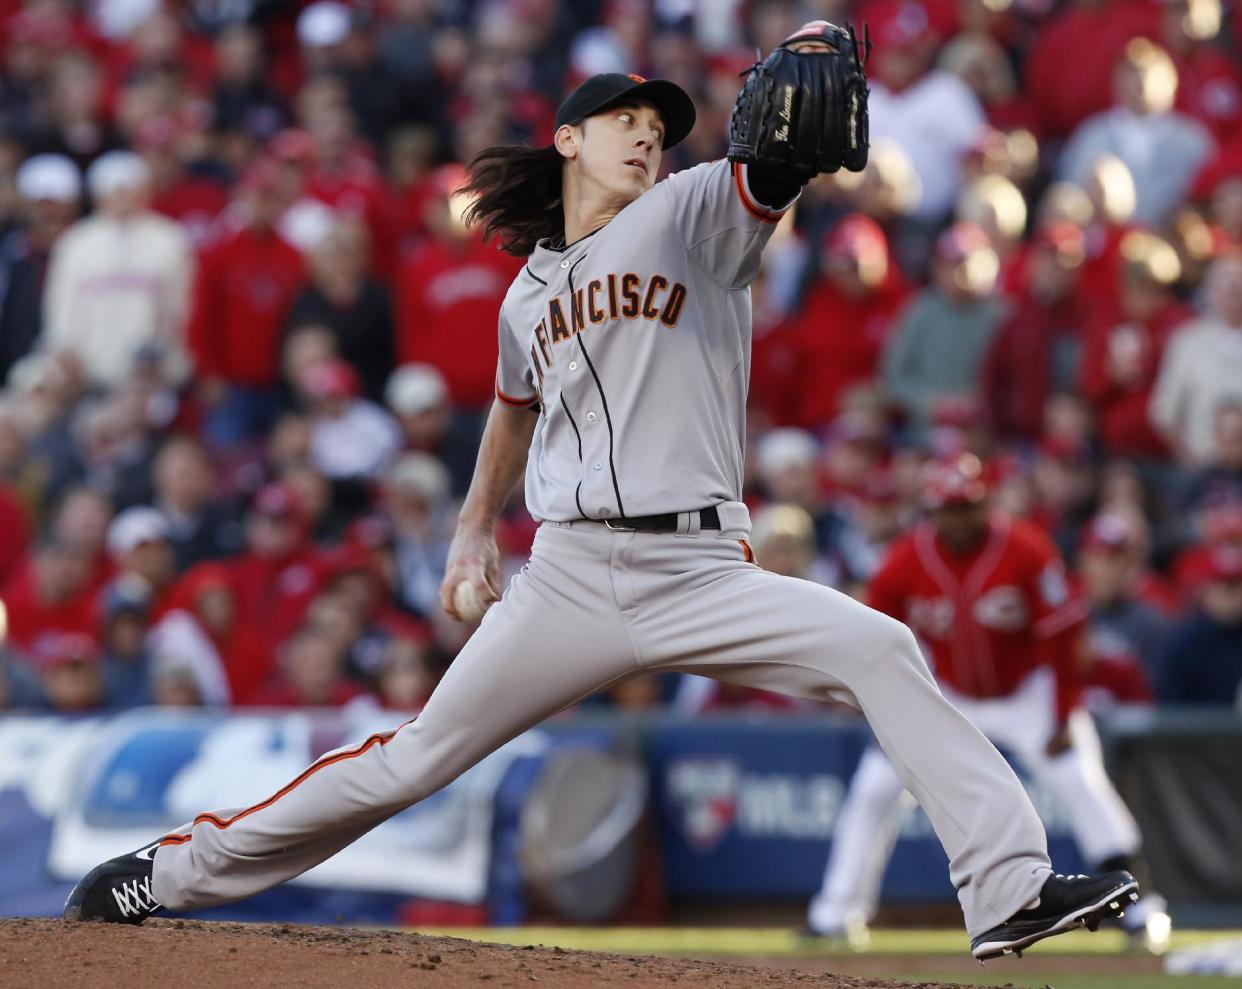 Tim Lincecum looks to find his old stuff on Thursday. (AP)